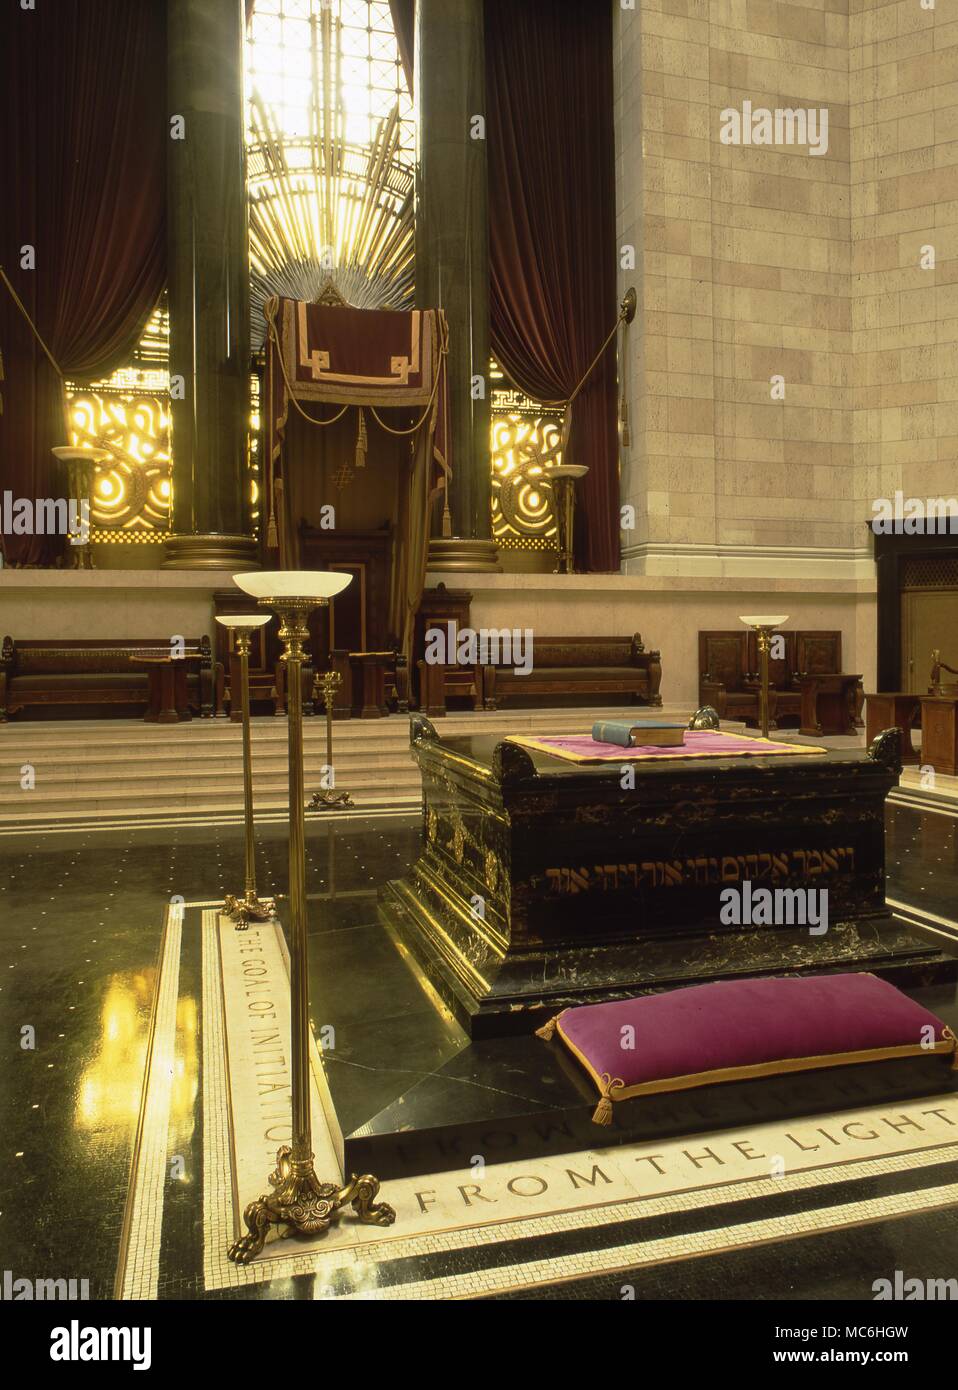 Masonic Temple in Washington DC. The Temple Room with the central altar. The apex of the polygonal dome is 100 feet above the altar. Stock Photo